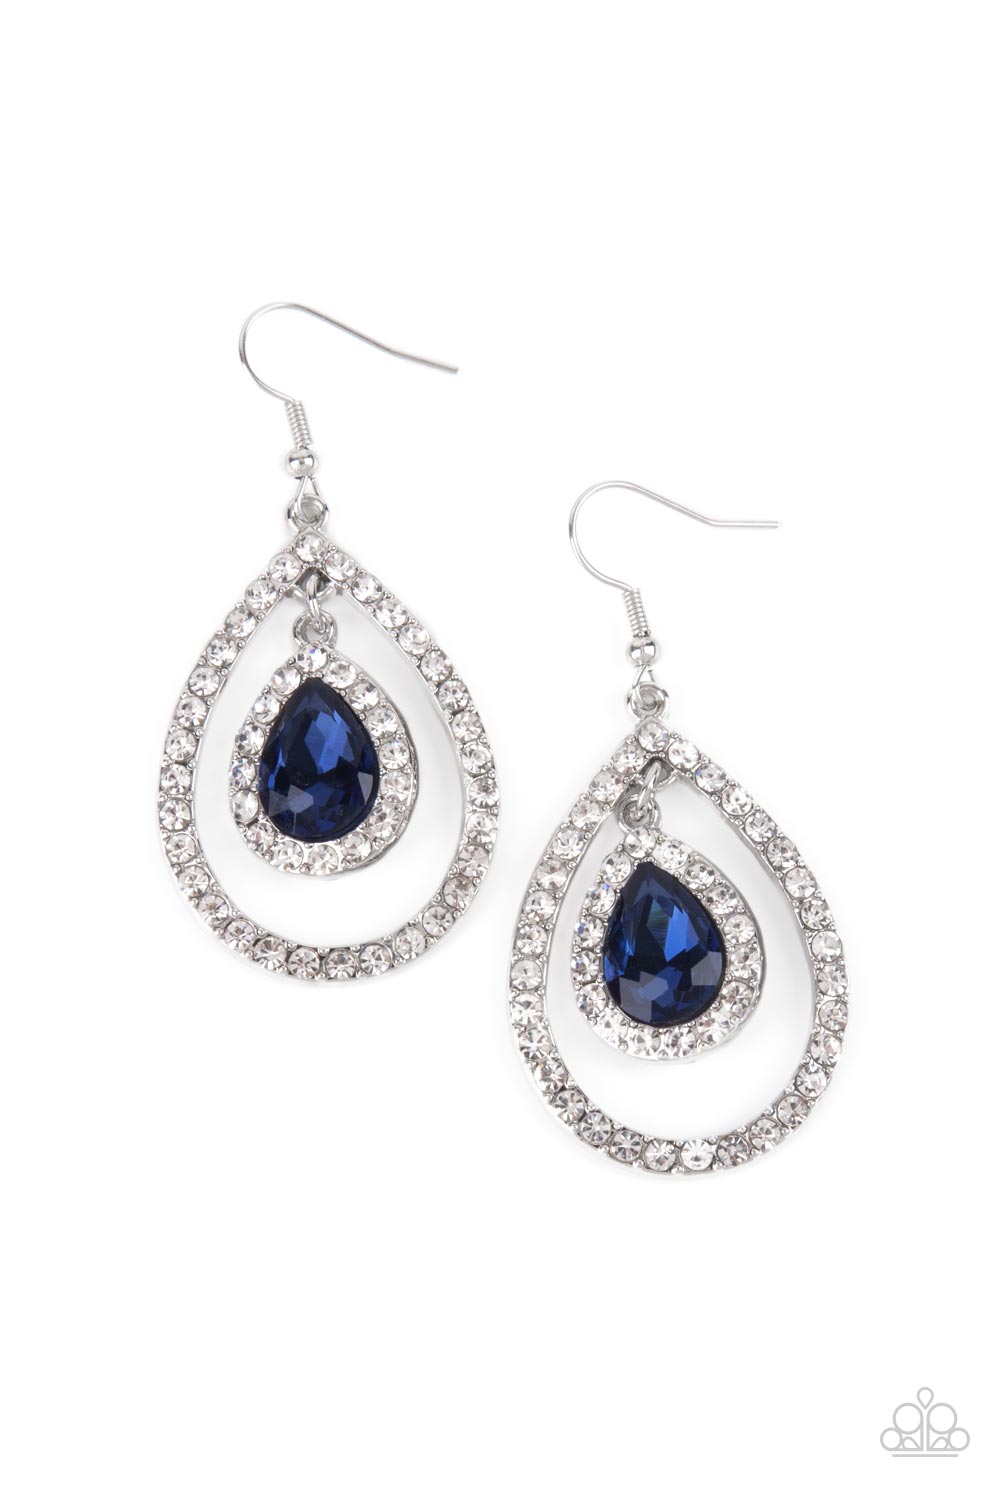 Blushing Bride - Blue Gem - Silver Earrings - Paparazzi Accessories - Blue teardrop gem, encased in a sparkling white rhinestone frame, creates a striking pendant as it dangles inside an airy teardrop frame encrusted with white rhinestones and culminates into a mesmerizing stylish earrings.